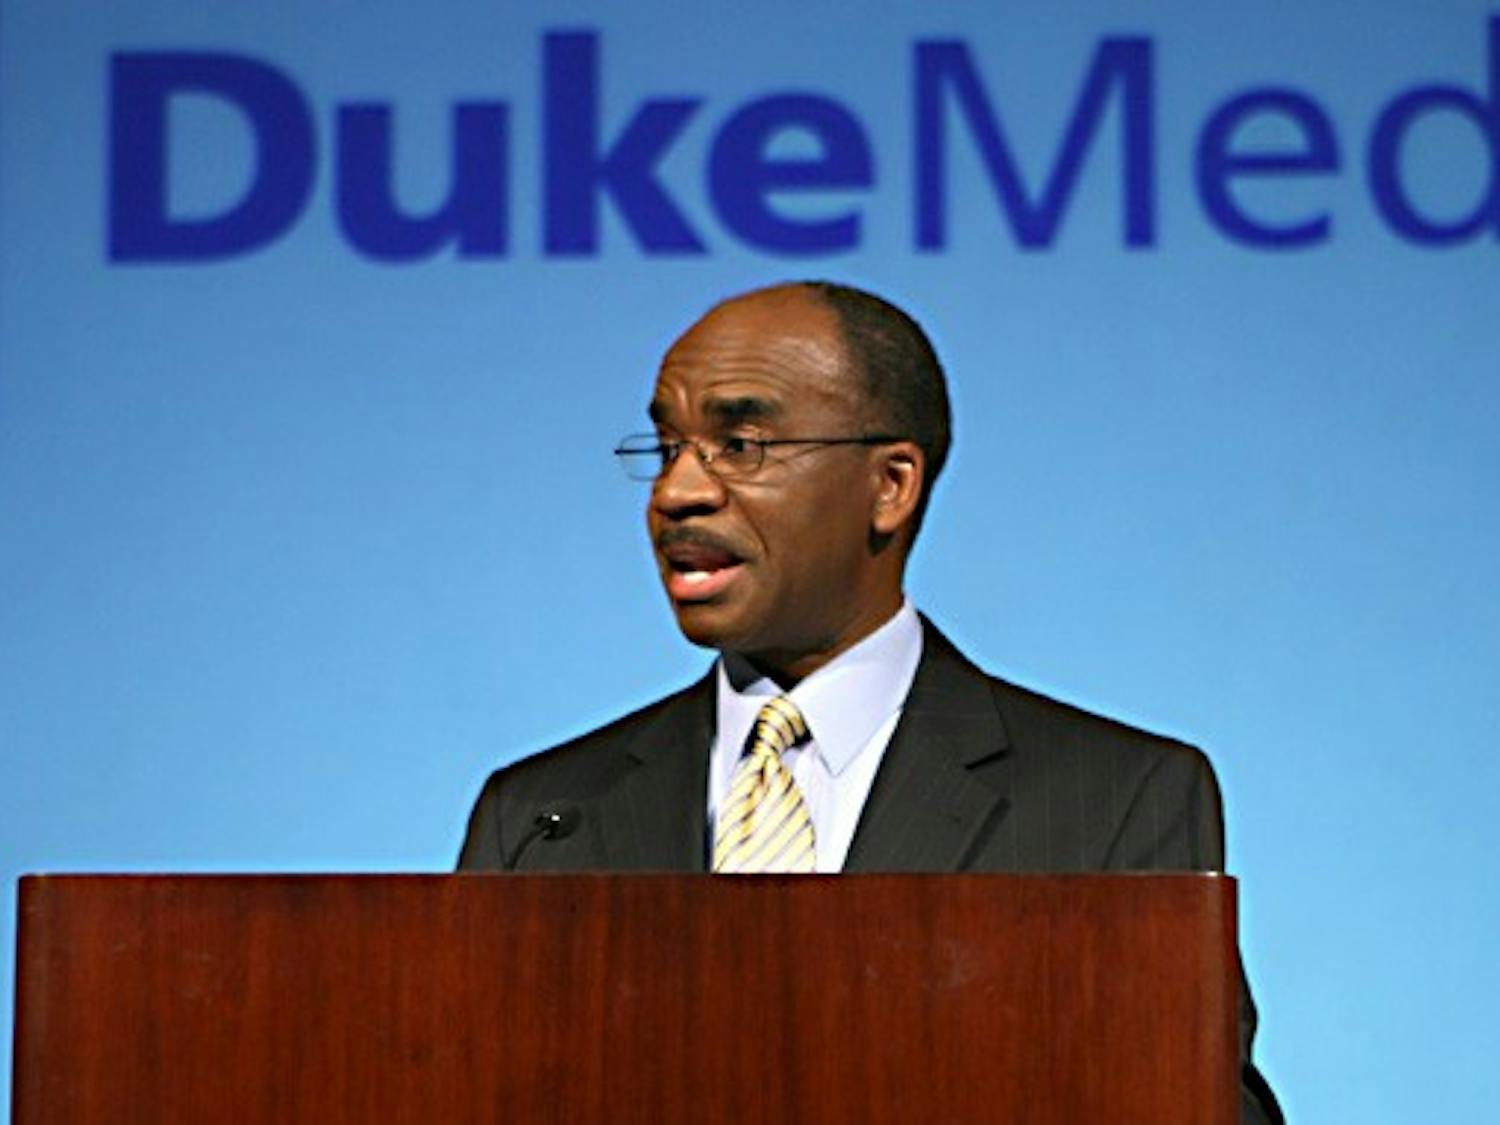 John Clark, who anchors ABC11 Eyewitness News, moderated a &quot;community dialogue&quot; that asked panelists how they envision a healthy Durham at the Durham Health Summit Monday.